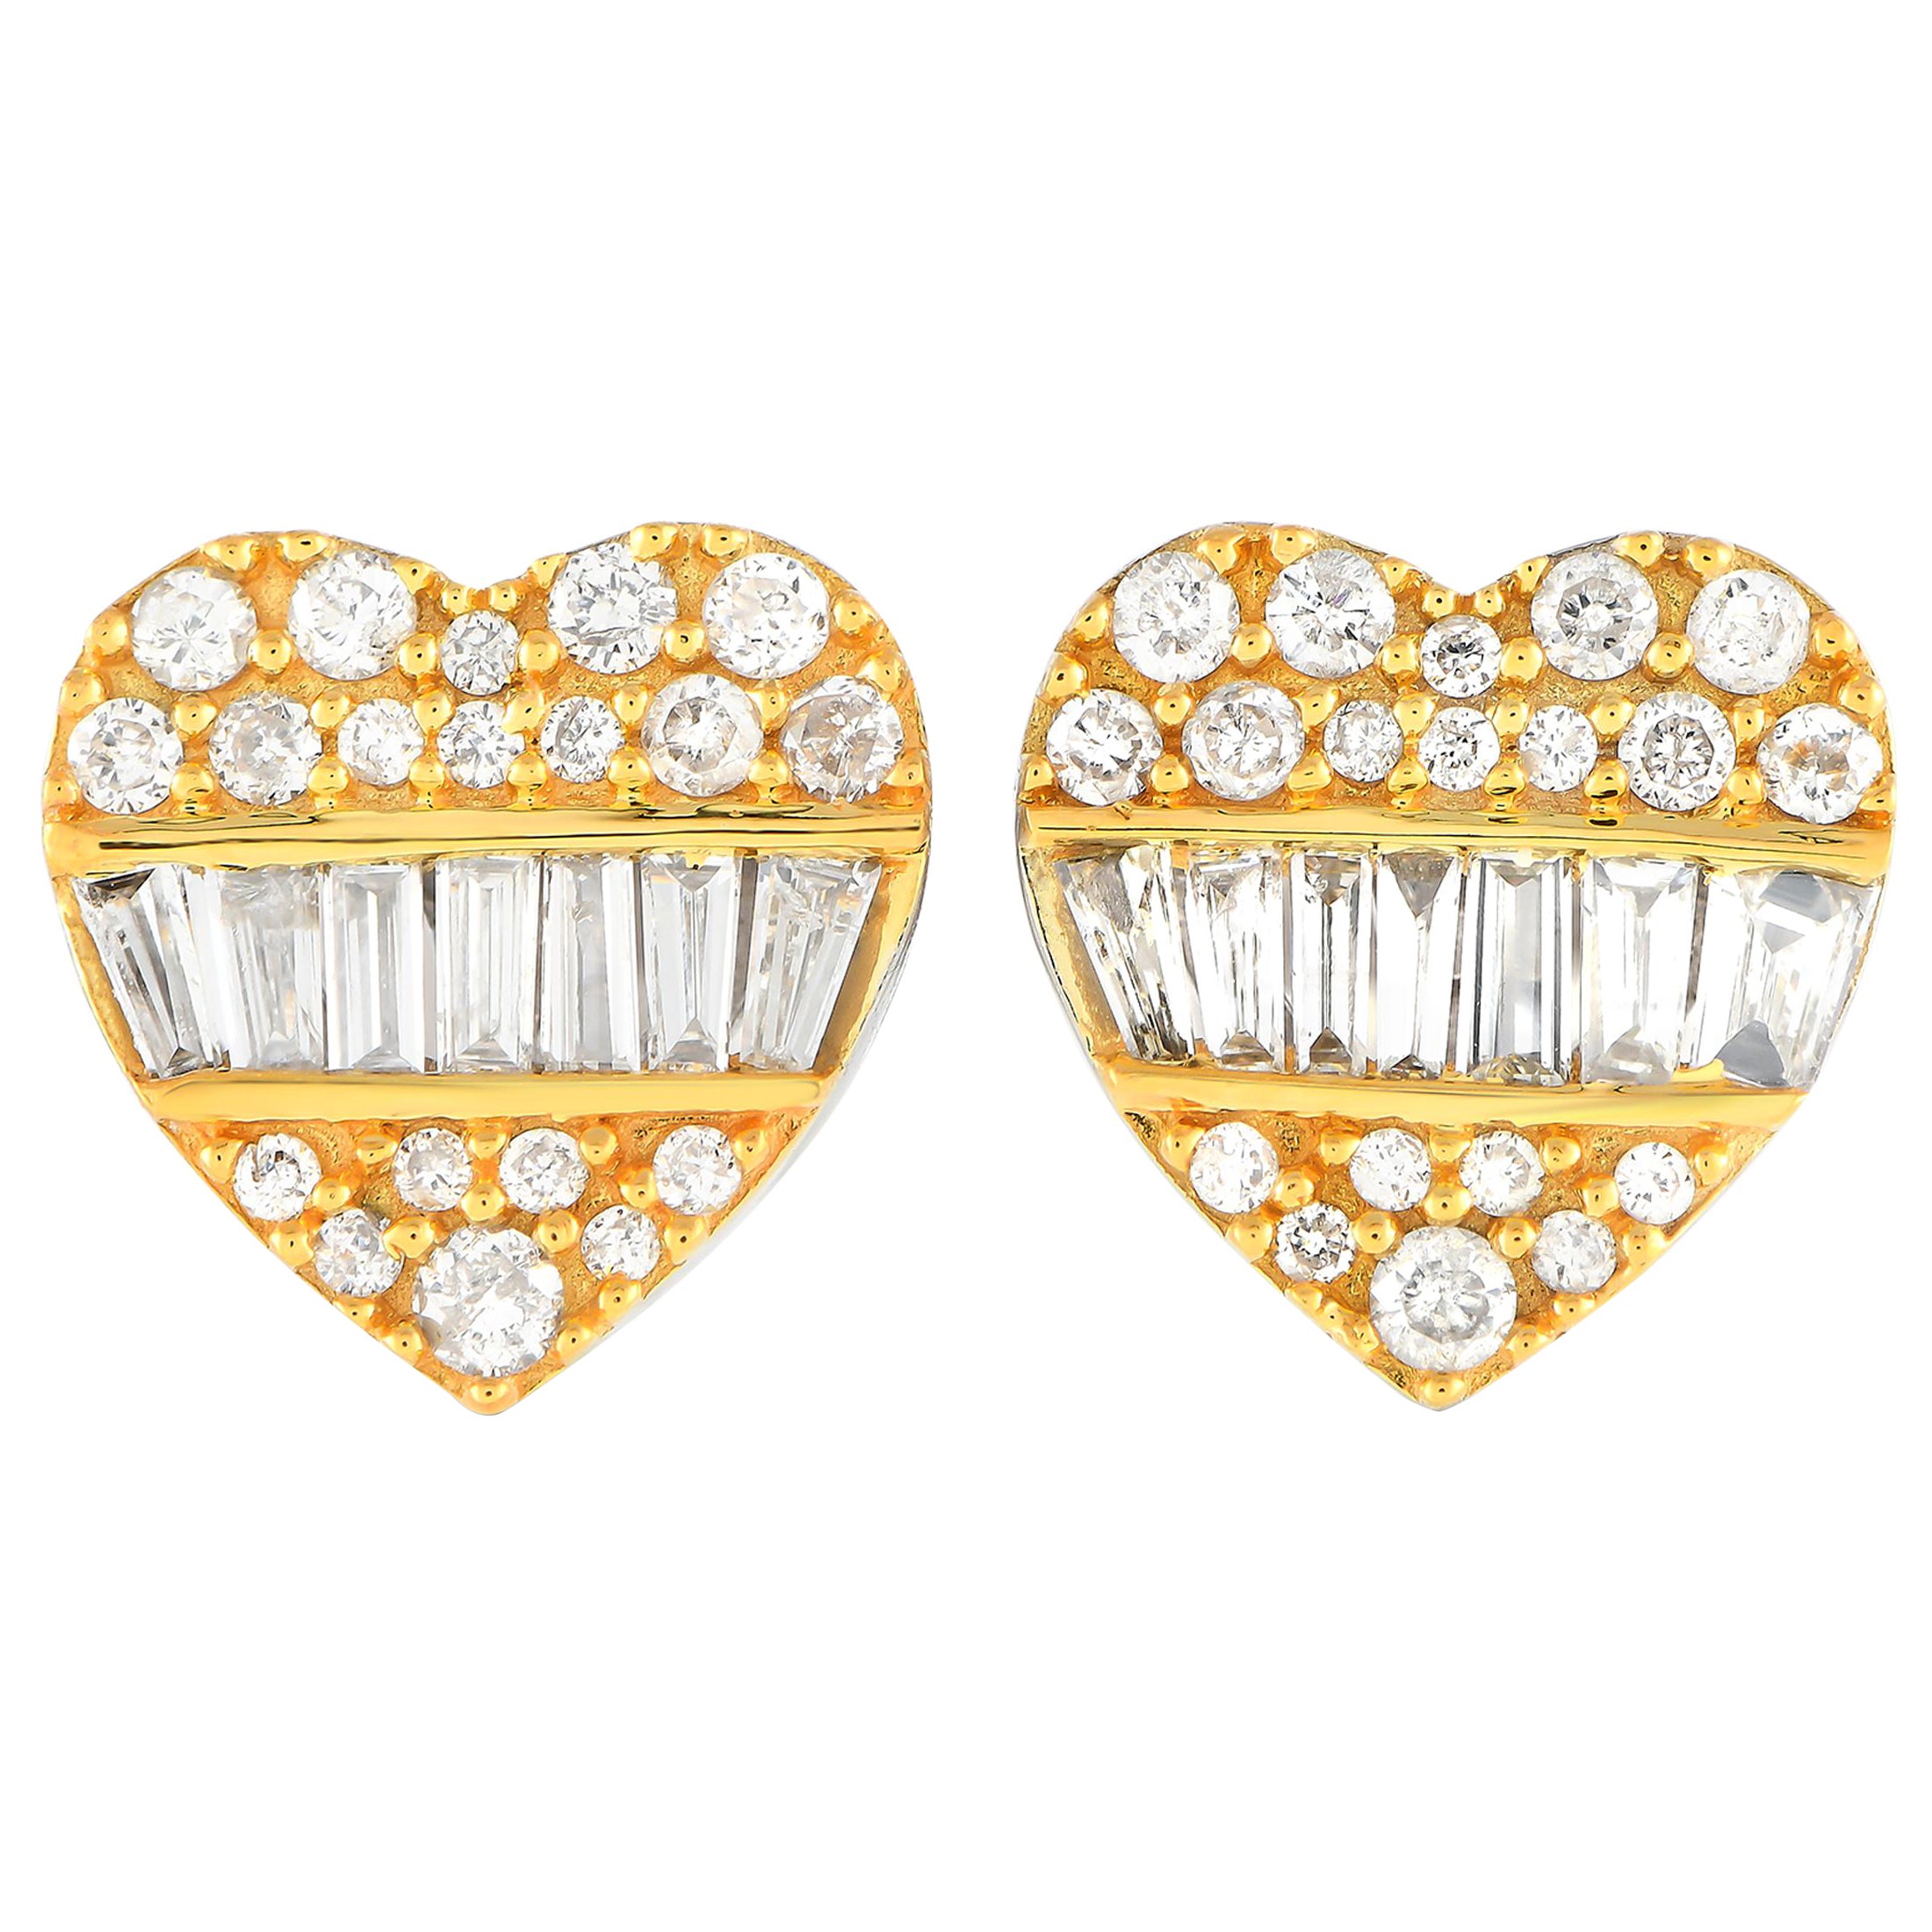 LB Exclusive 14K White and Yellow Gold 0.35ct Diamond Heart Earrings For Sale